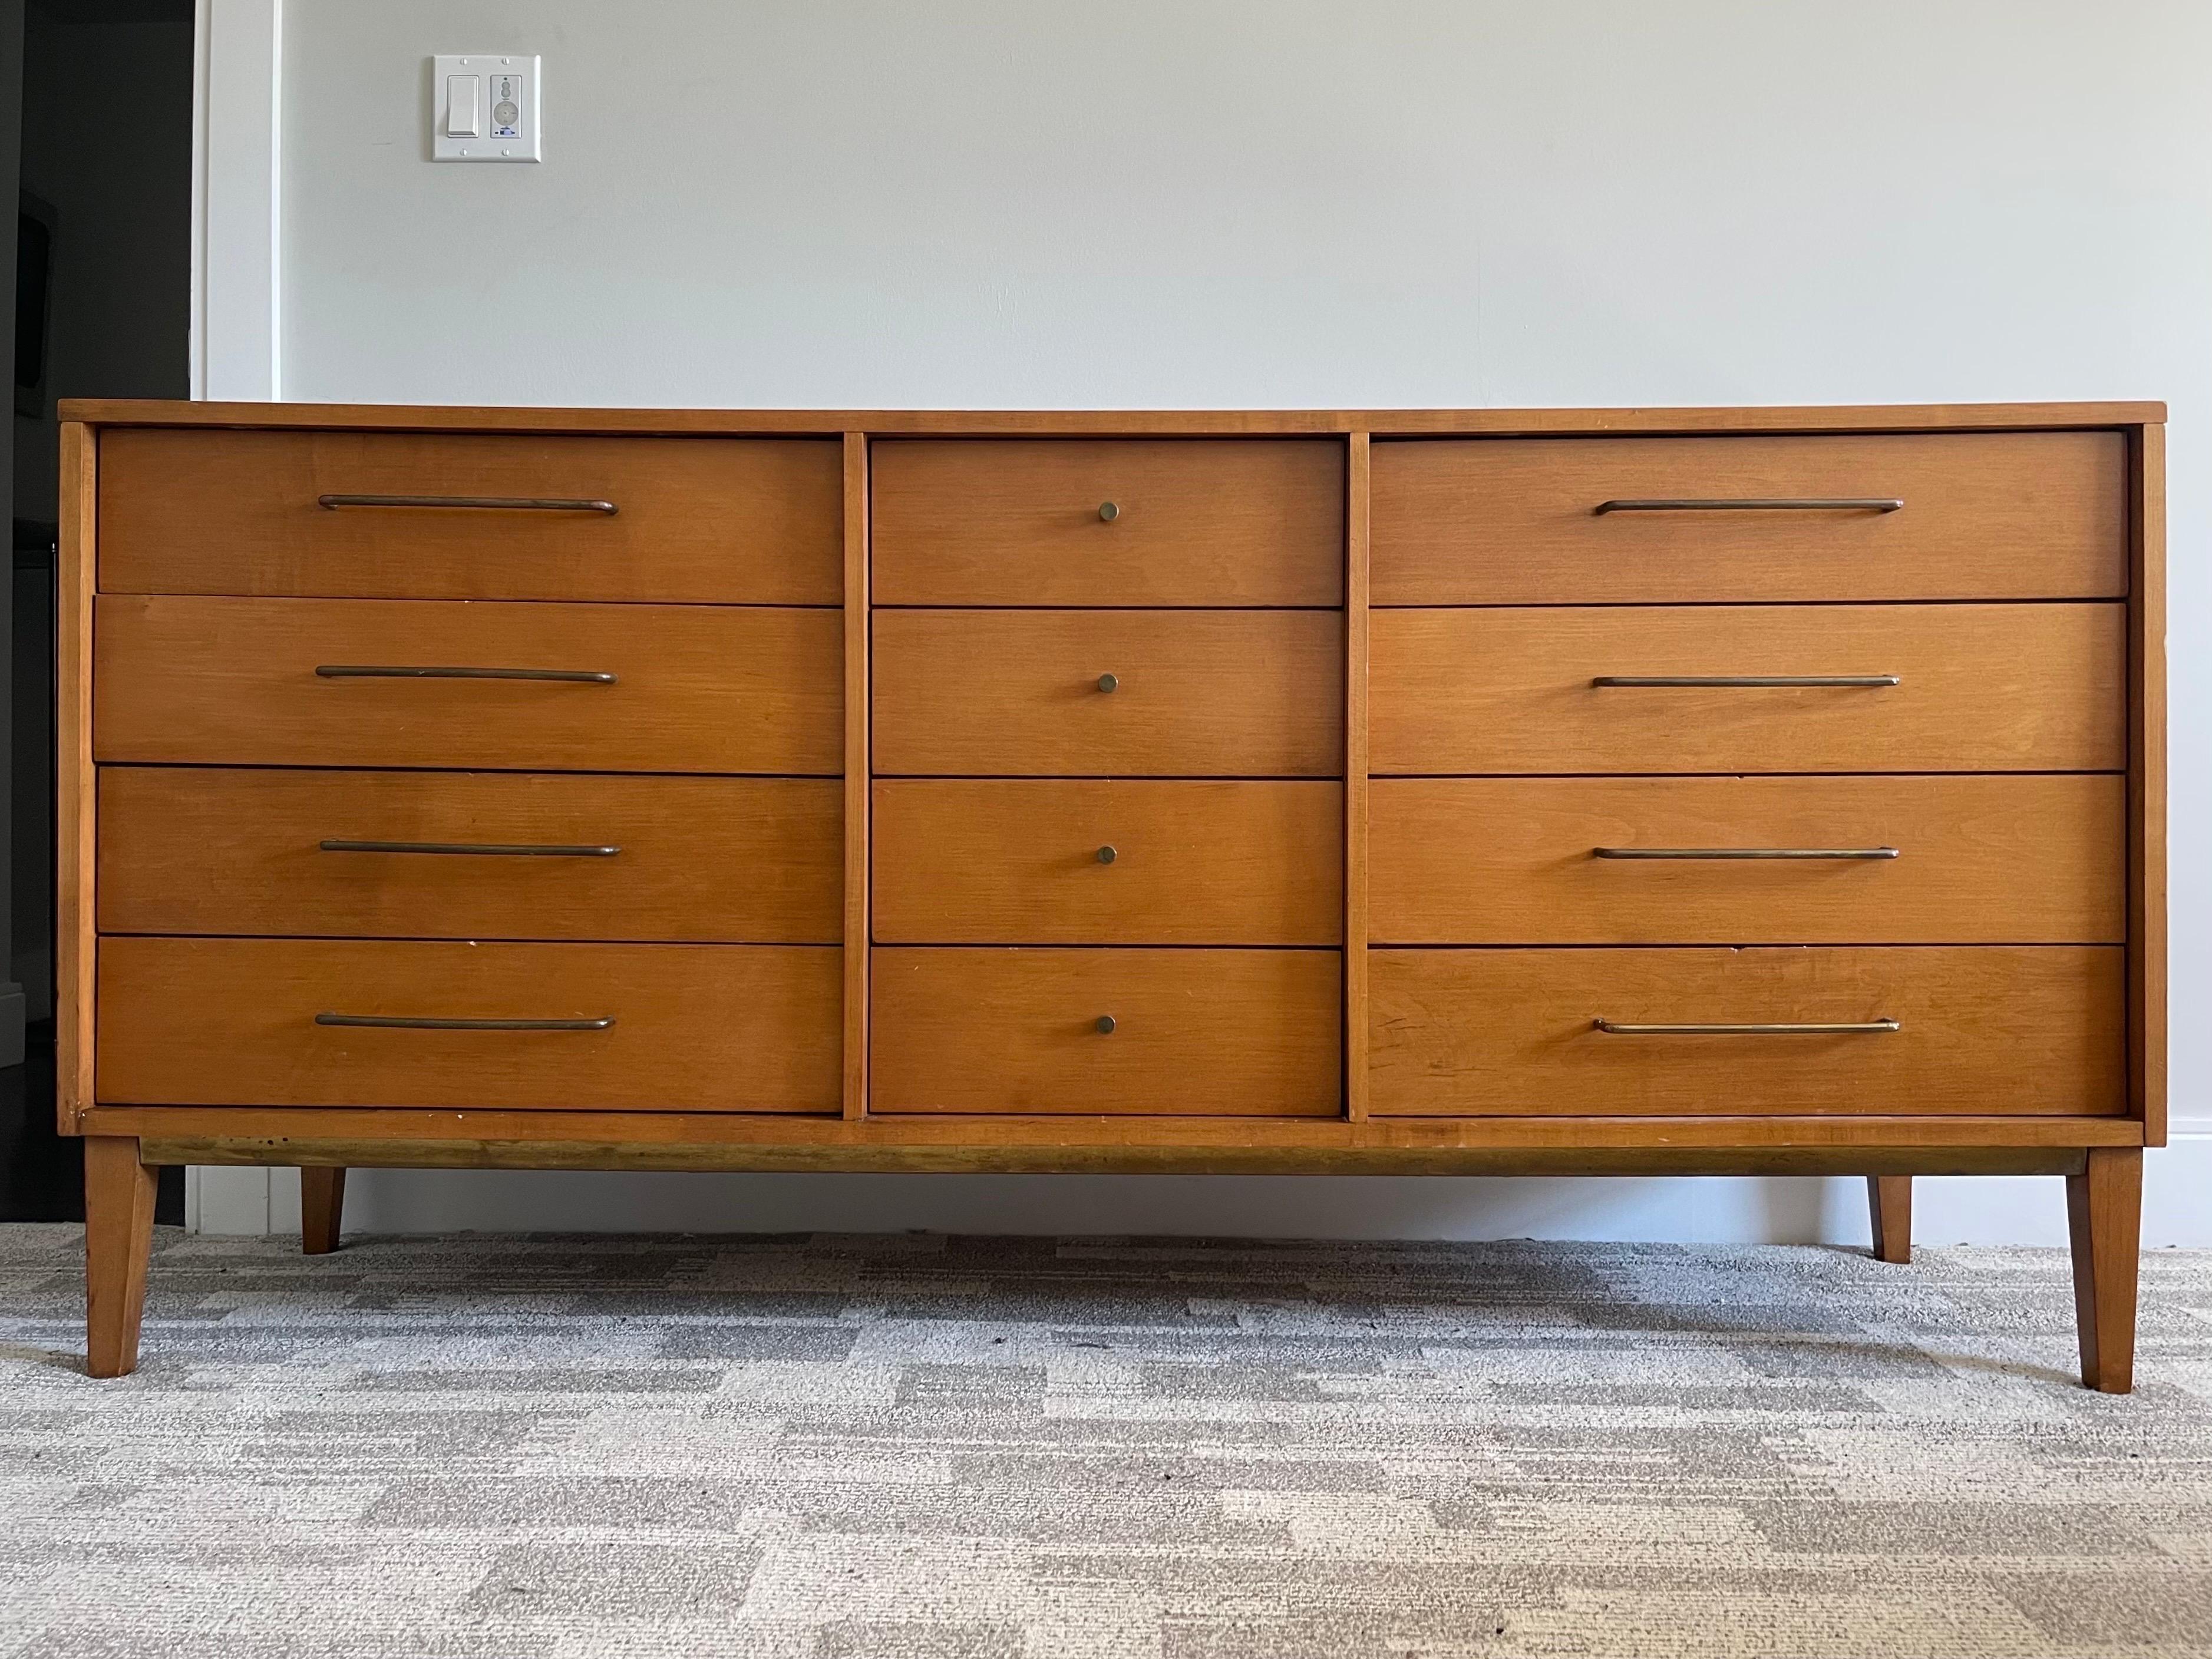 Rare early maple dresser by Milo Baughman for Murray Furniture. Solid Wood. Brass pulls and lowlight details under the outside collar. Patina and wear are just the right amount. 
66 x 31 x 18